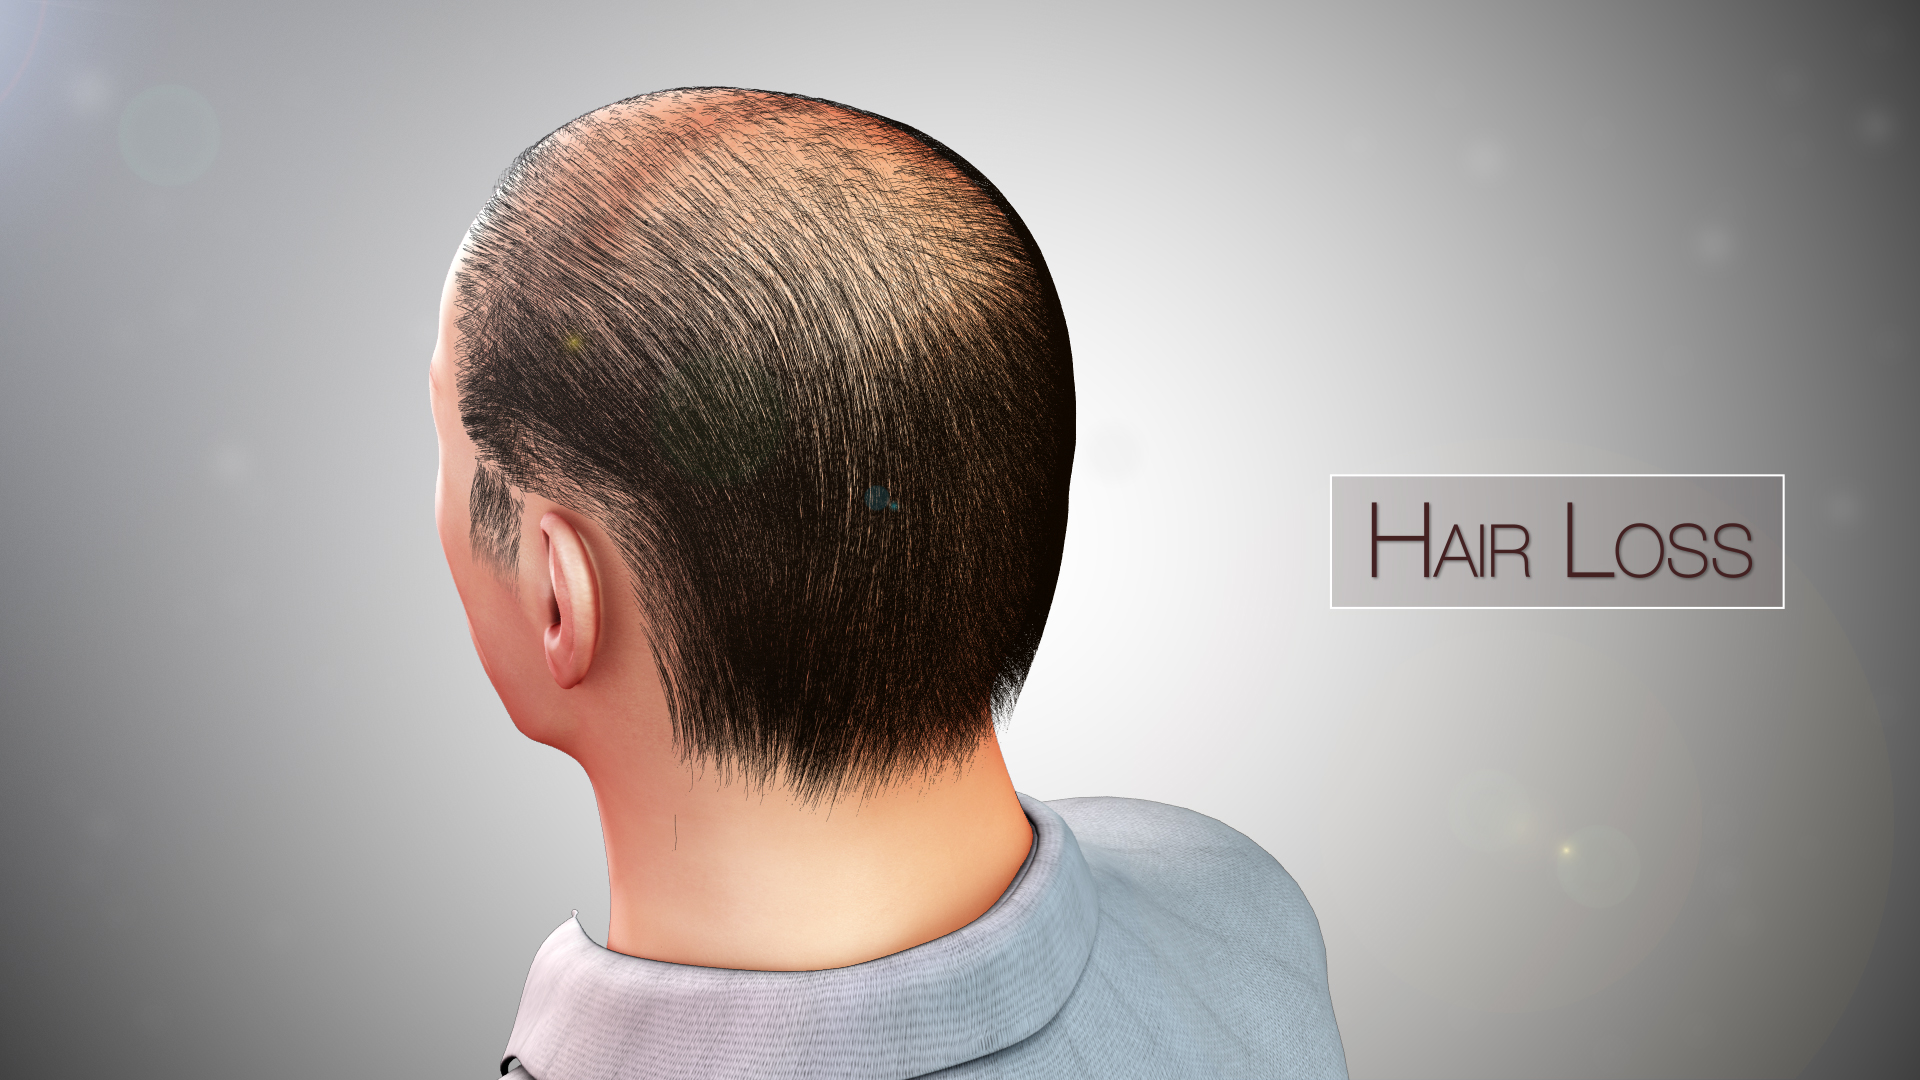 Hair Loss Shown & Explained Using A Medical Animation